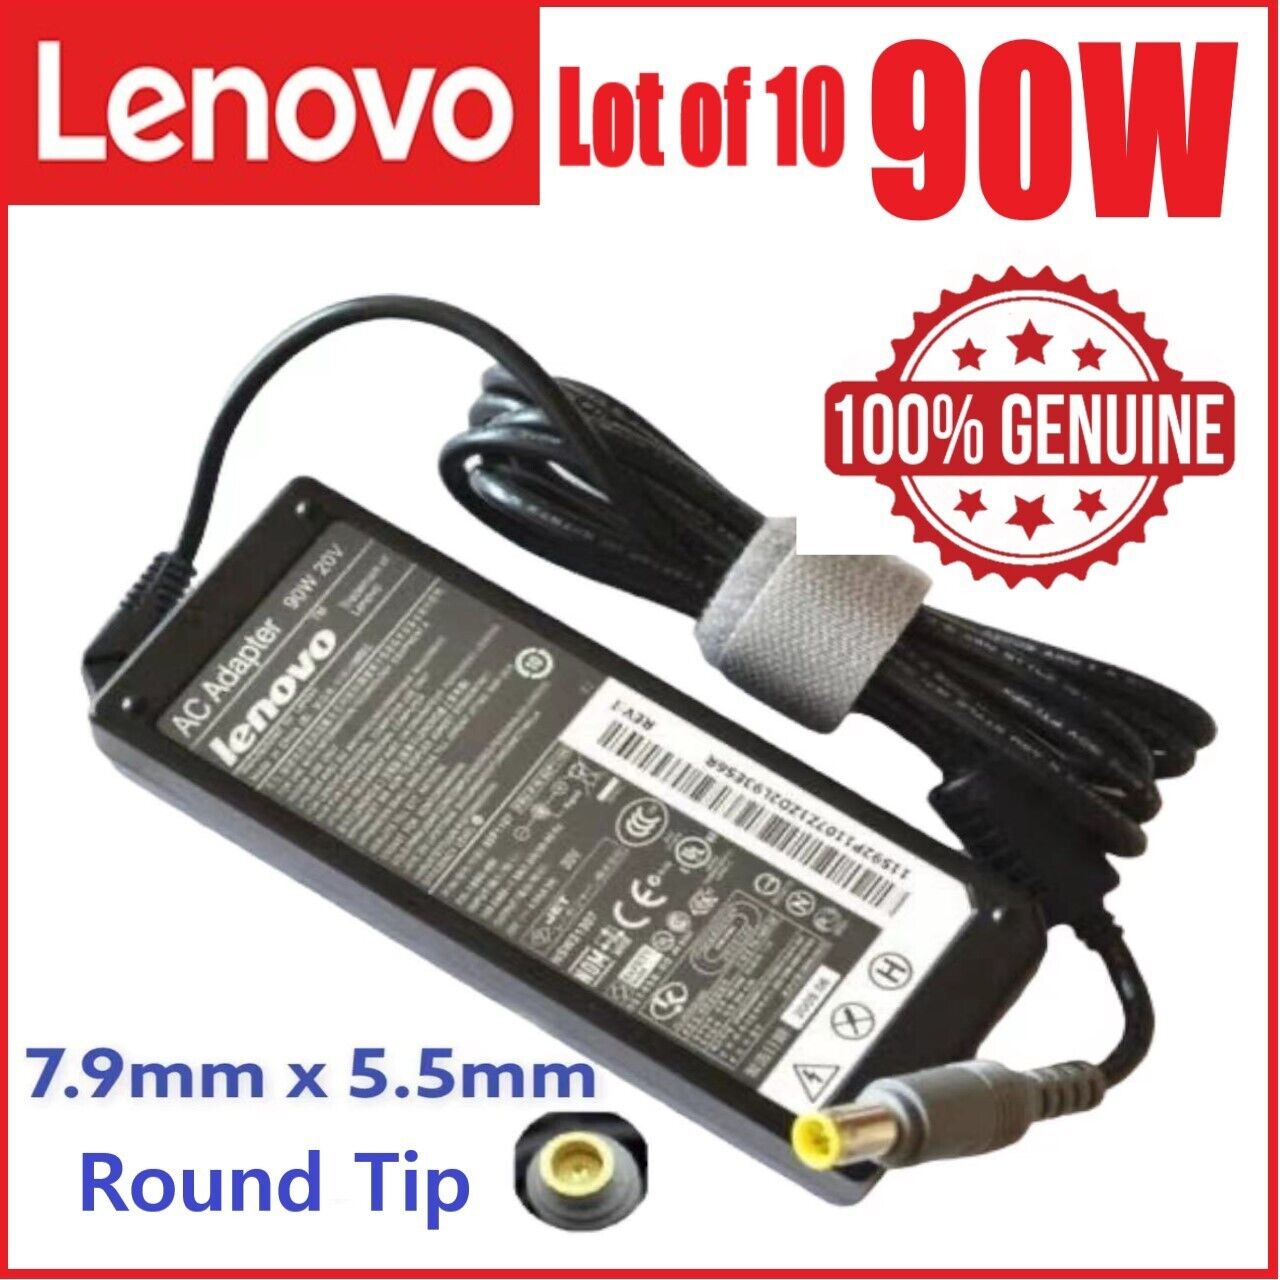 LOT 10 Genuine Lenovo ThinkPad Laptop 90W AC Adapter Charger 20V 3.25A Round Tip